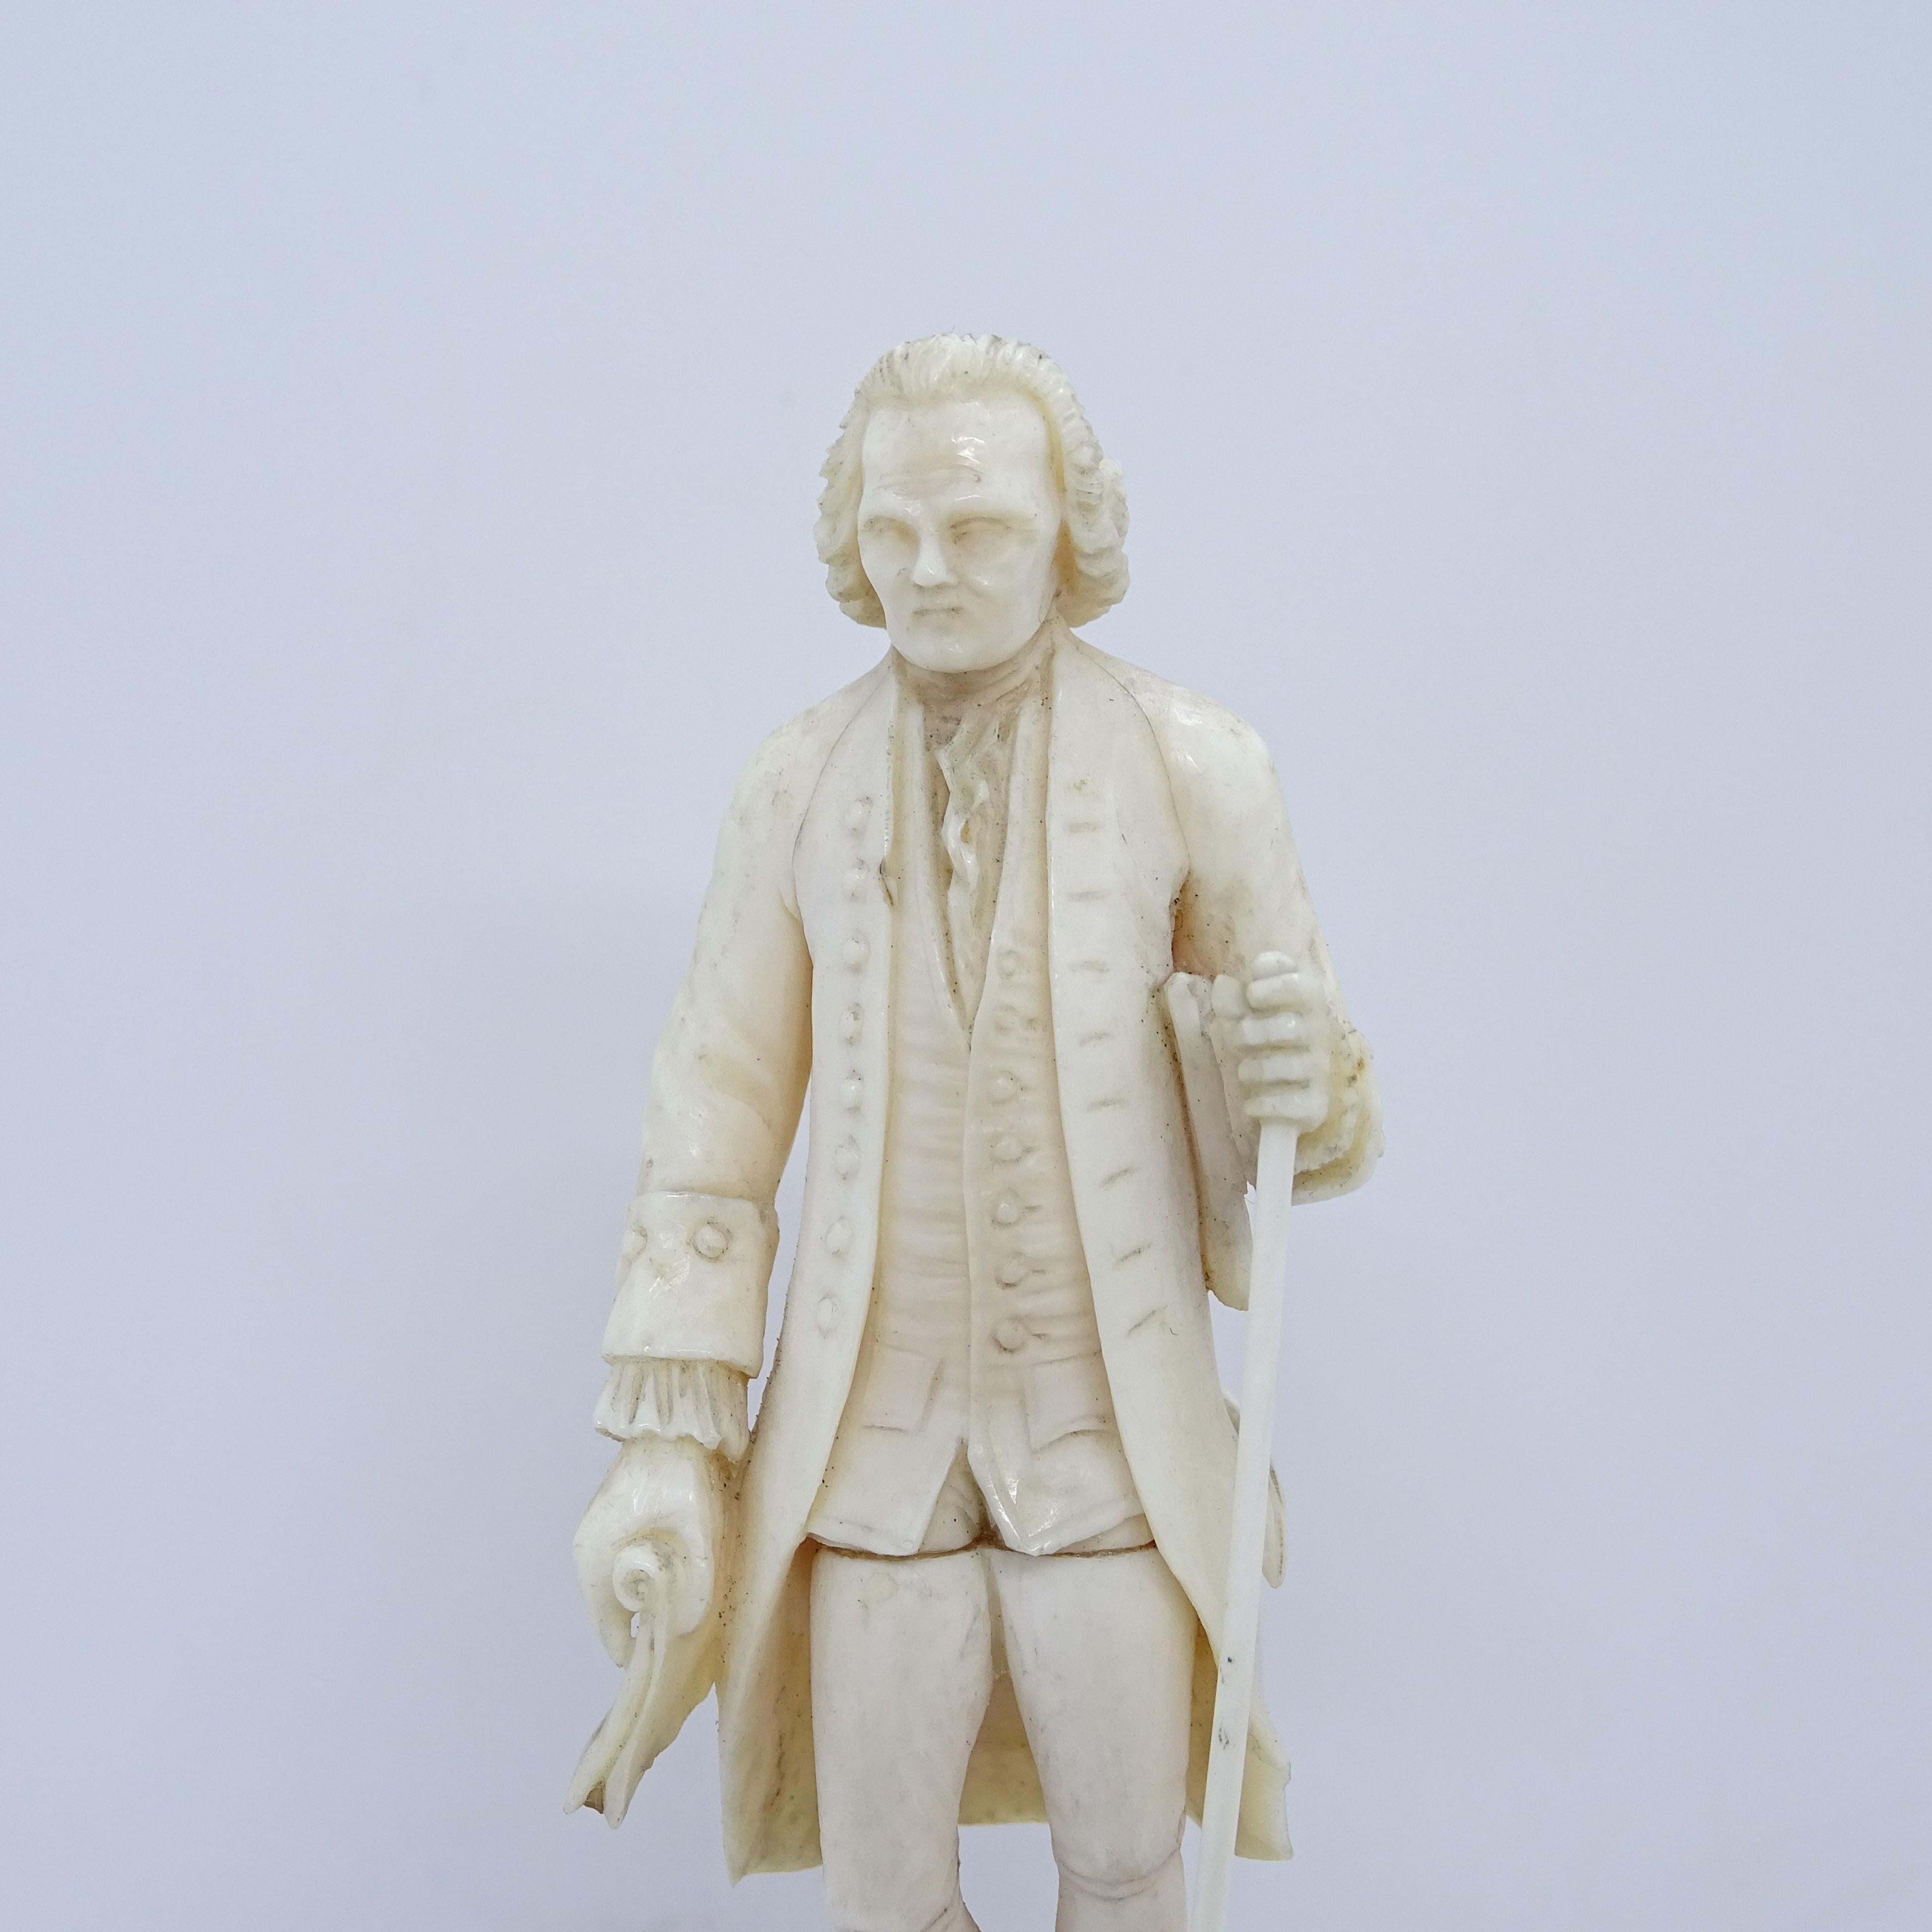  French 18thcentury Diderot sculpture, with papers in one hand For Sale 6